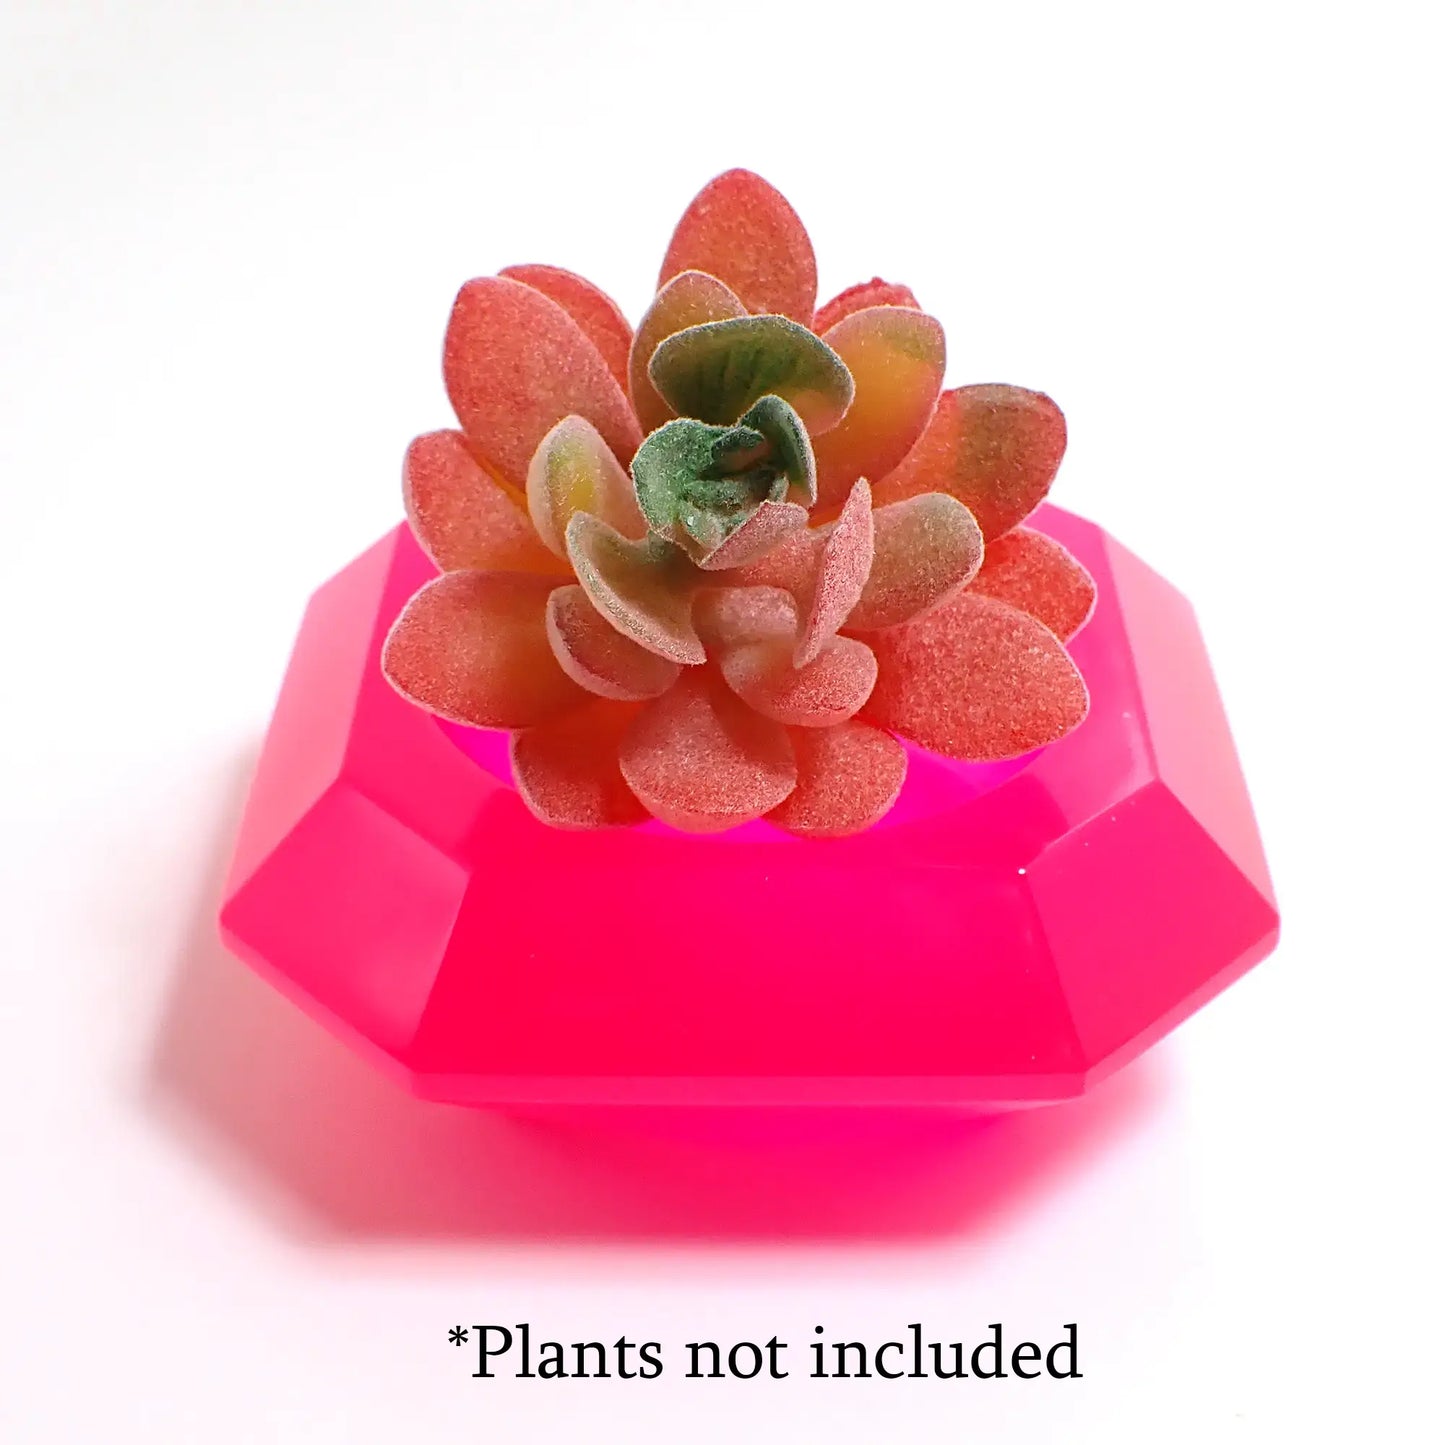 Small Handmade Faceted Octagon Bright Neon Pink Resin Decorative Pot